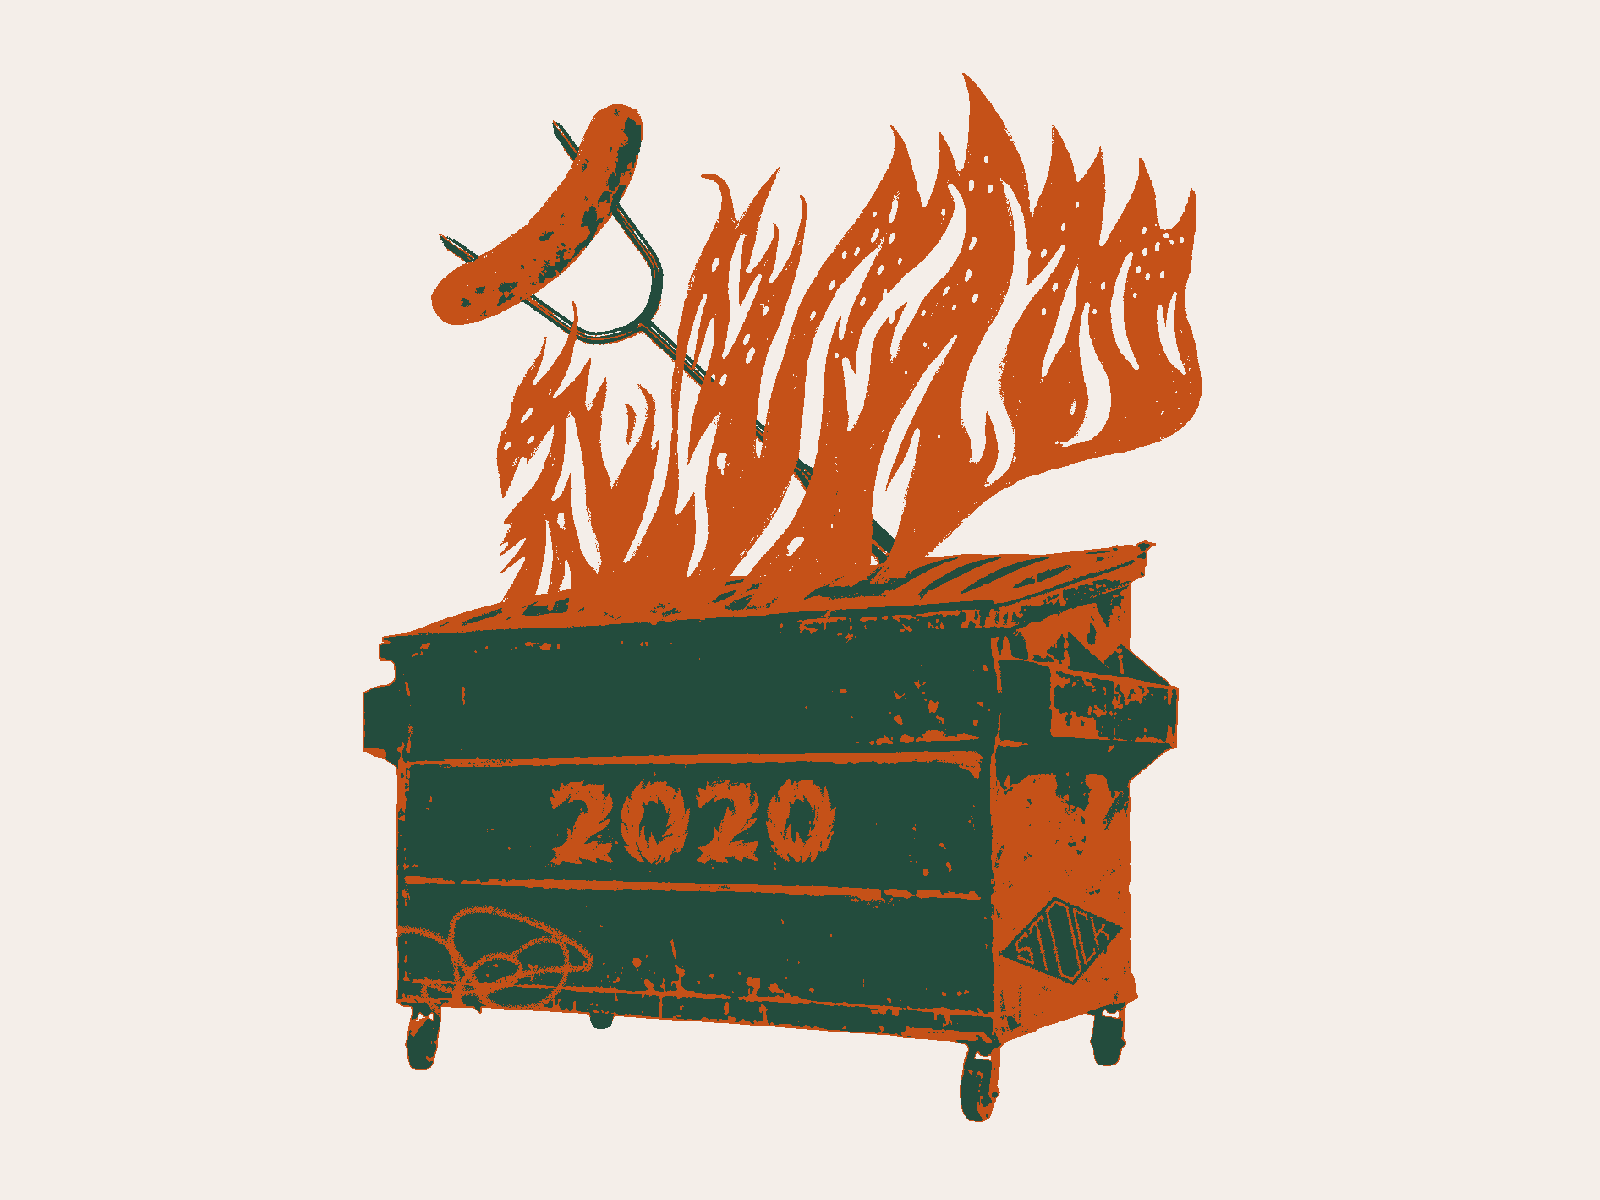 Dumpster Fire by Seth Nickerson on Dribbble